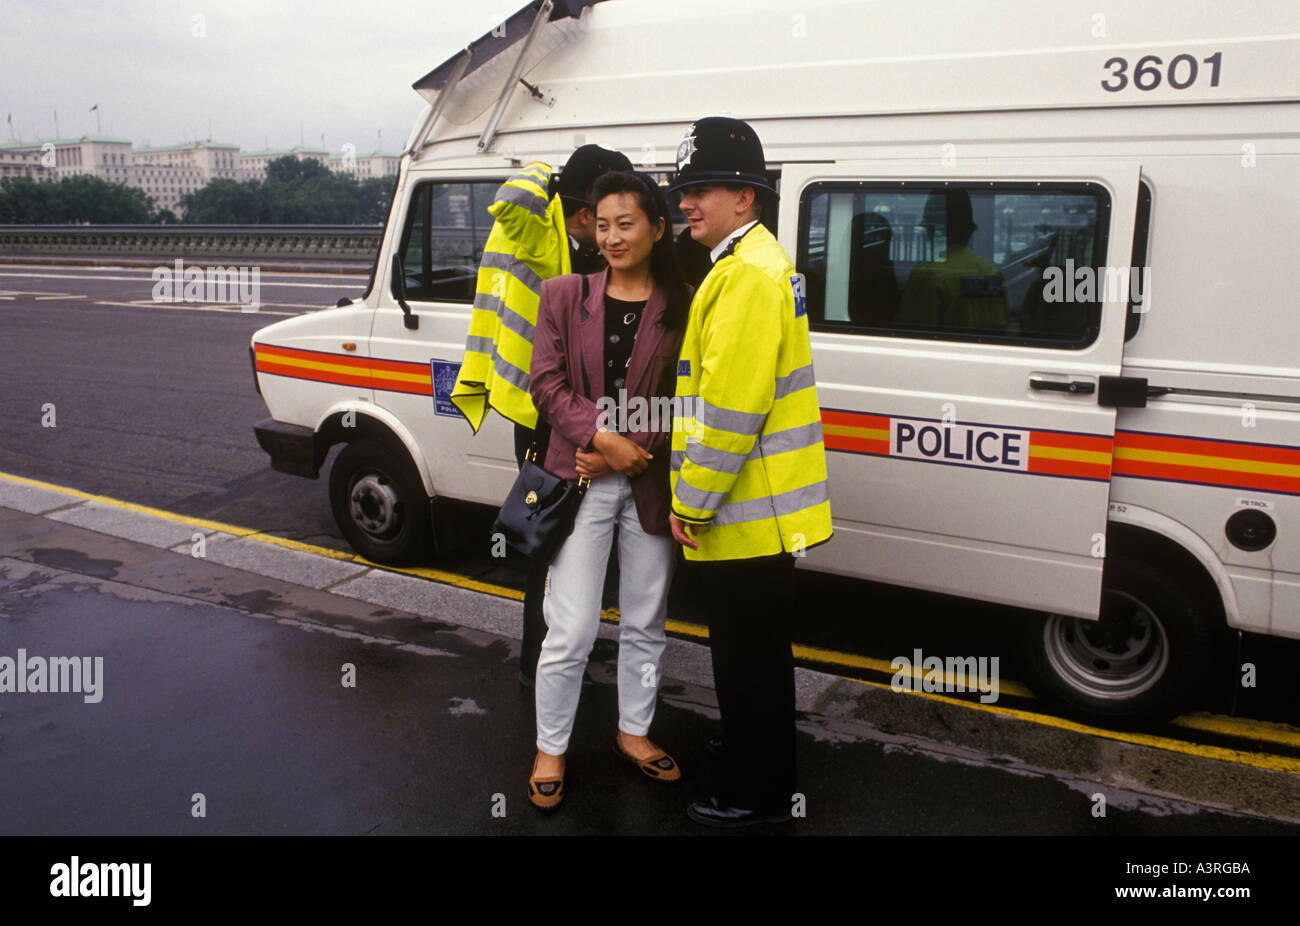 Policeman on duty Westminster Bridge London has his photograph taken with female Japanese tourist UK 1992 1990s HOMER SYKES Stock Photo